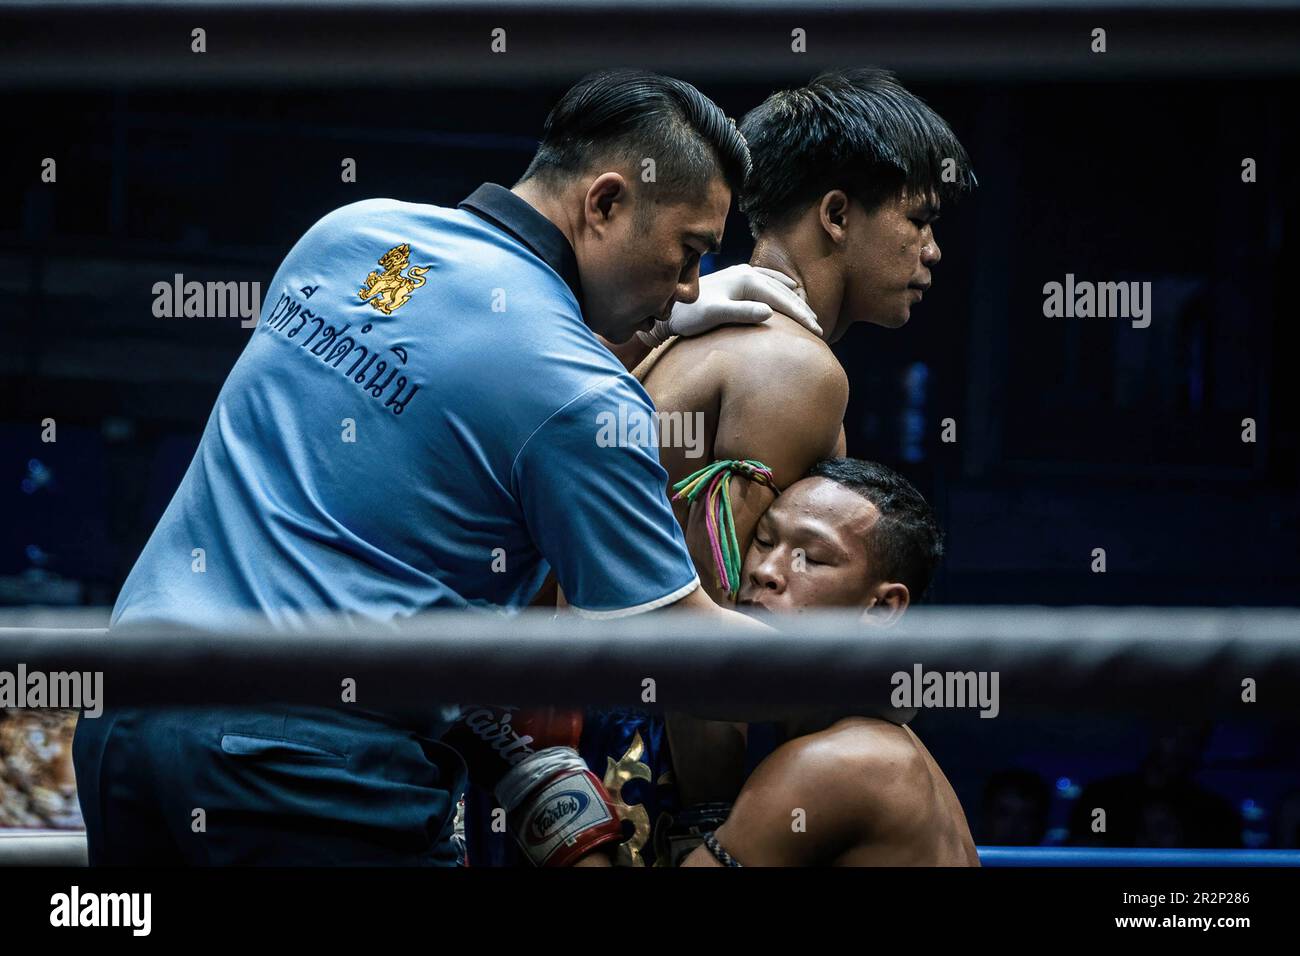 Bangkok, Thailand. 07th Nov, 2022. A referee is seen counting out after a Muay Thai boxer is knocked down, at Bangkok's Rajadamnern stadium. Muay Thai fights at Thailand's iconic boxing Rajadamnern stadium, the dream stage for competitors and it is favourite for combat sports all over the world. (Photo by Nathalie Jamois/SOPA Images/Sipa USA) Credit: Sipa USA/Alamy Live News Stock Photo